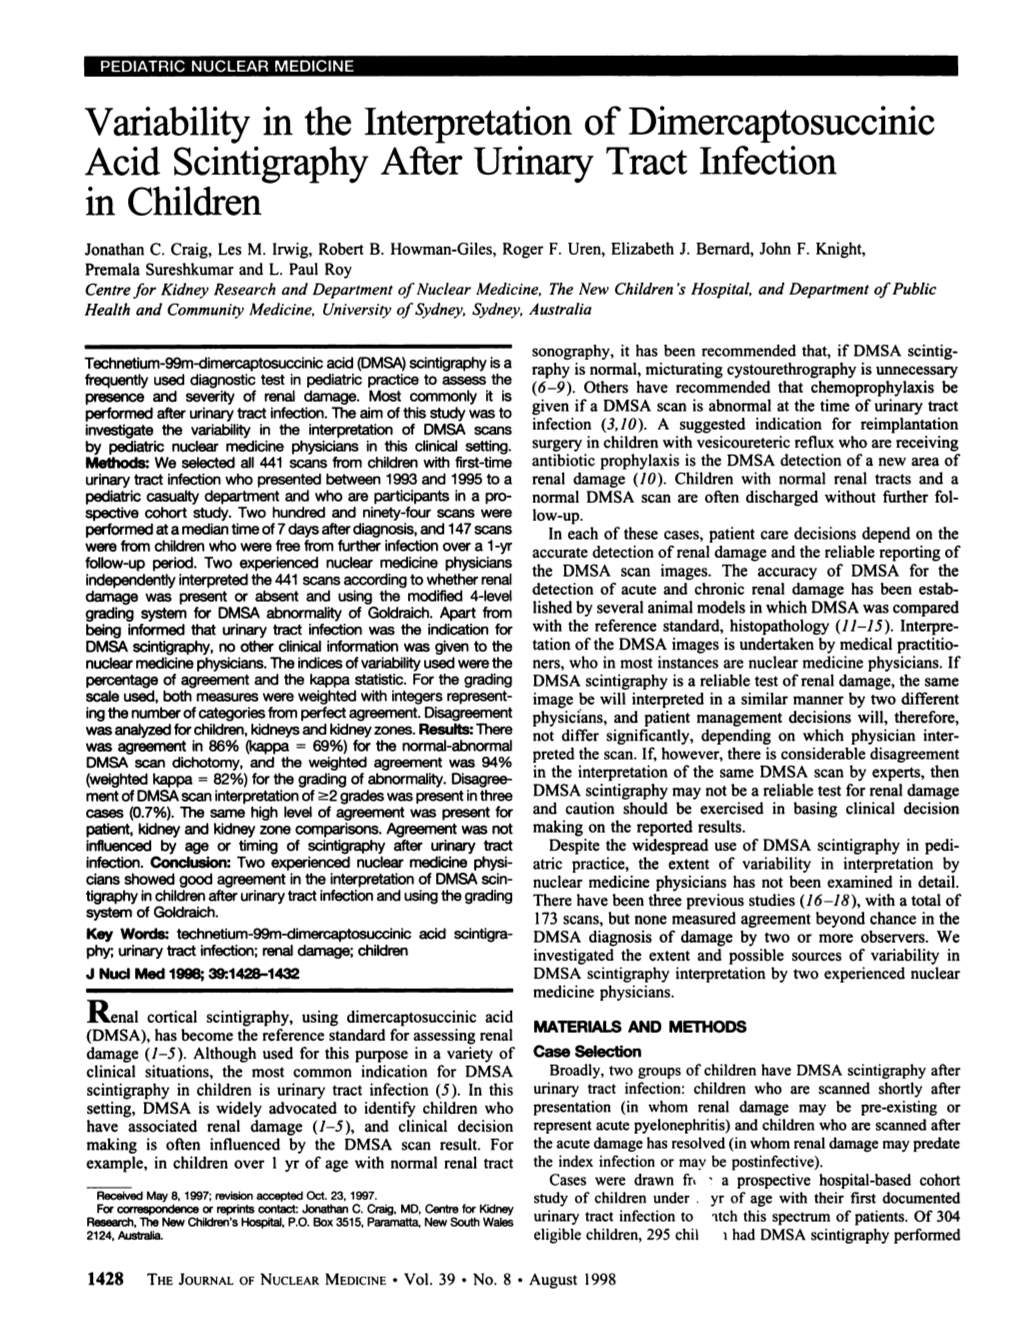 Variability in the Interpretation of Dimercaptosuccinic Acid Scintigraphy After Urinary Tract Infection in Children